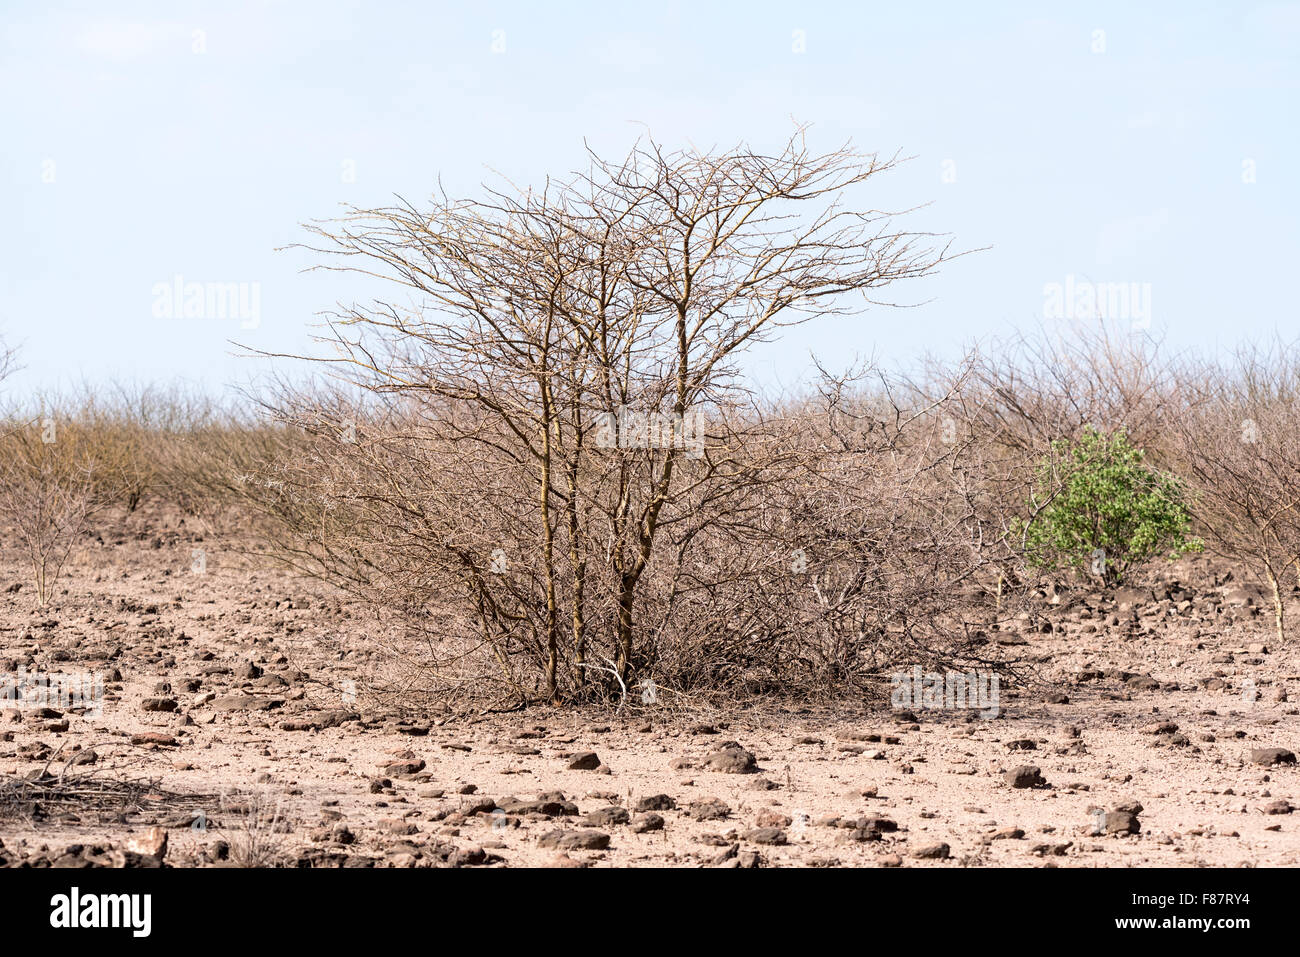 Typical arid landscape of Awash National Park, Ethiopia in the dry season Stock Photo